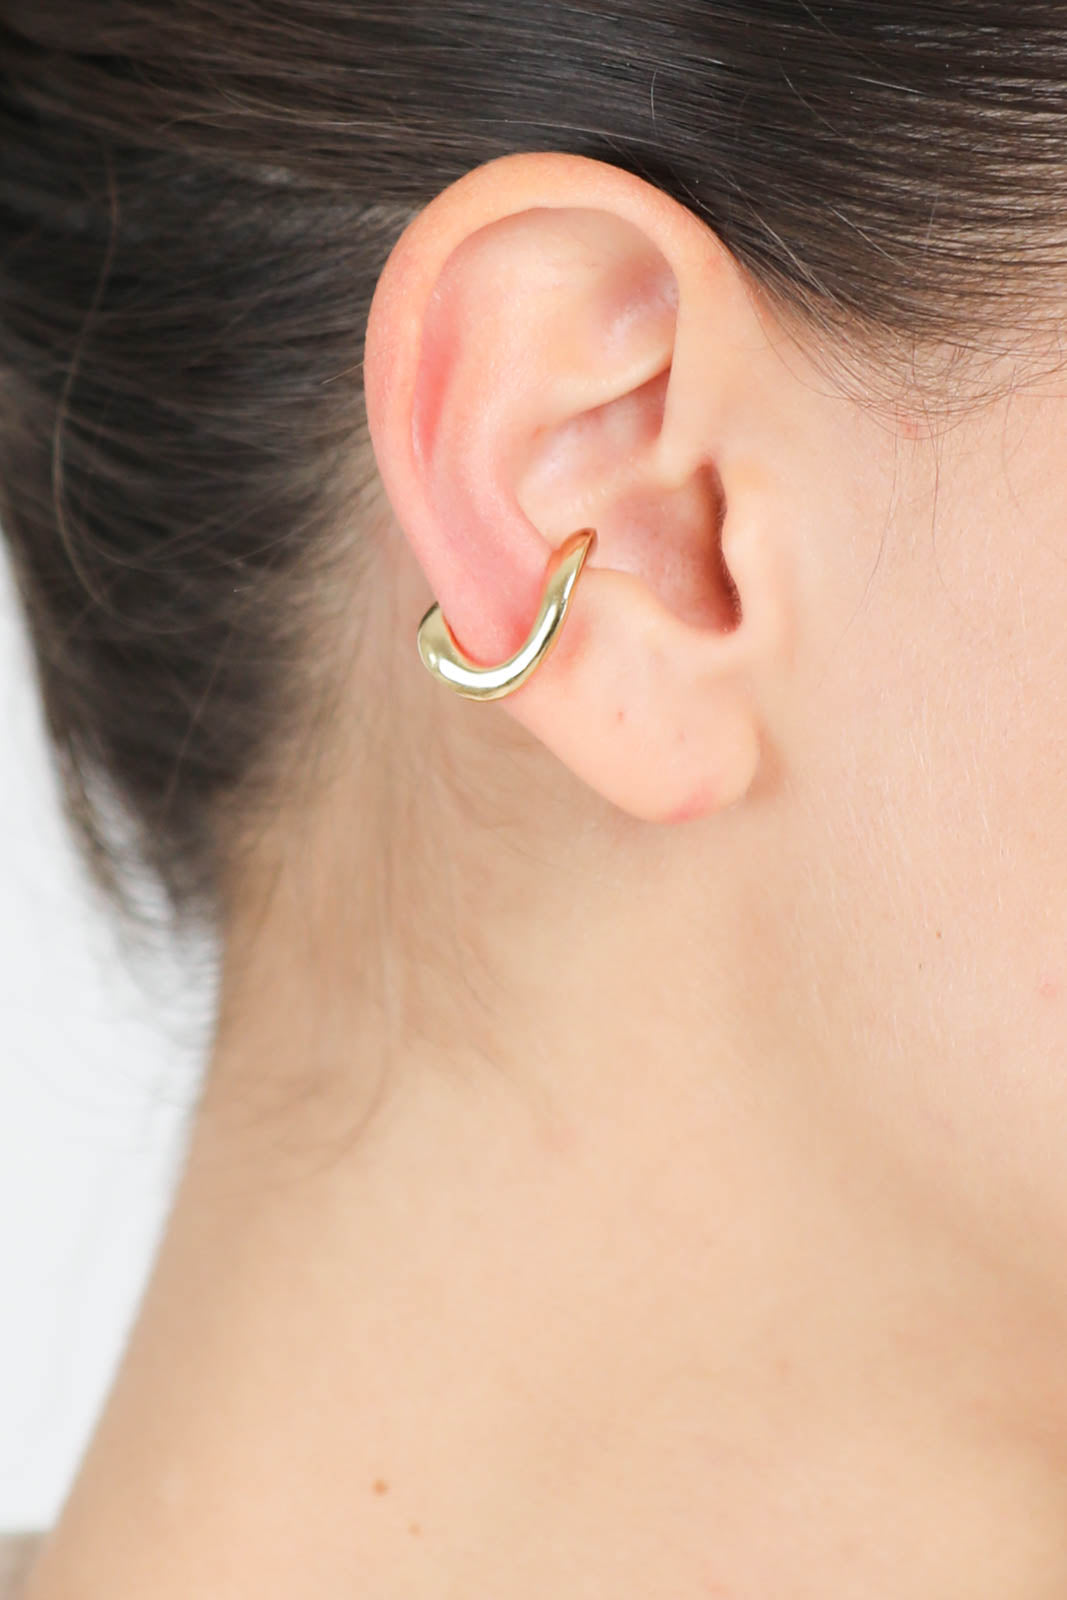 Ohrring Earcuff Link Small in Gold